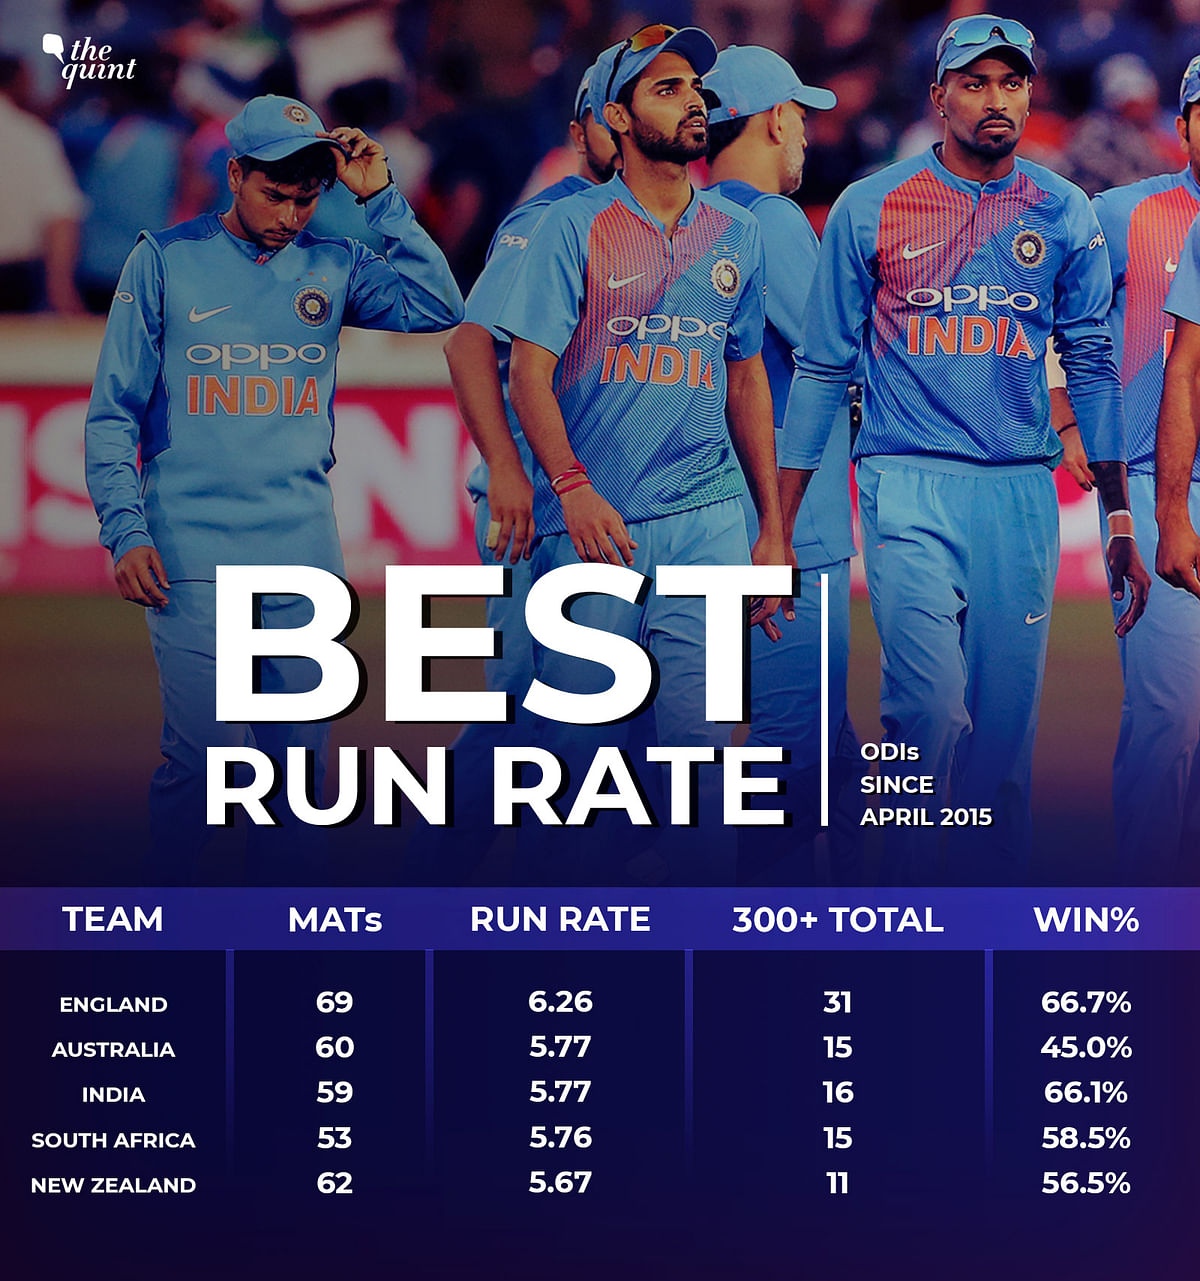 If India is able to complete a washout, they could displace England from the top of the ICC ODI rankings.